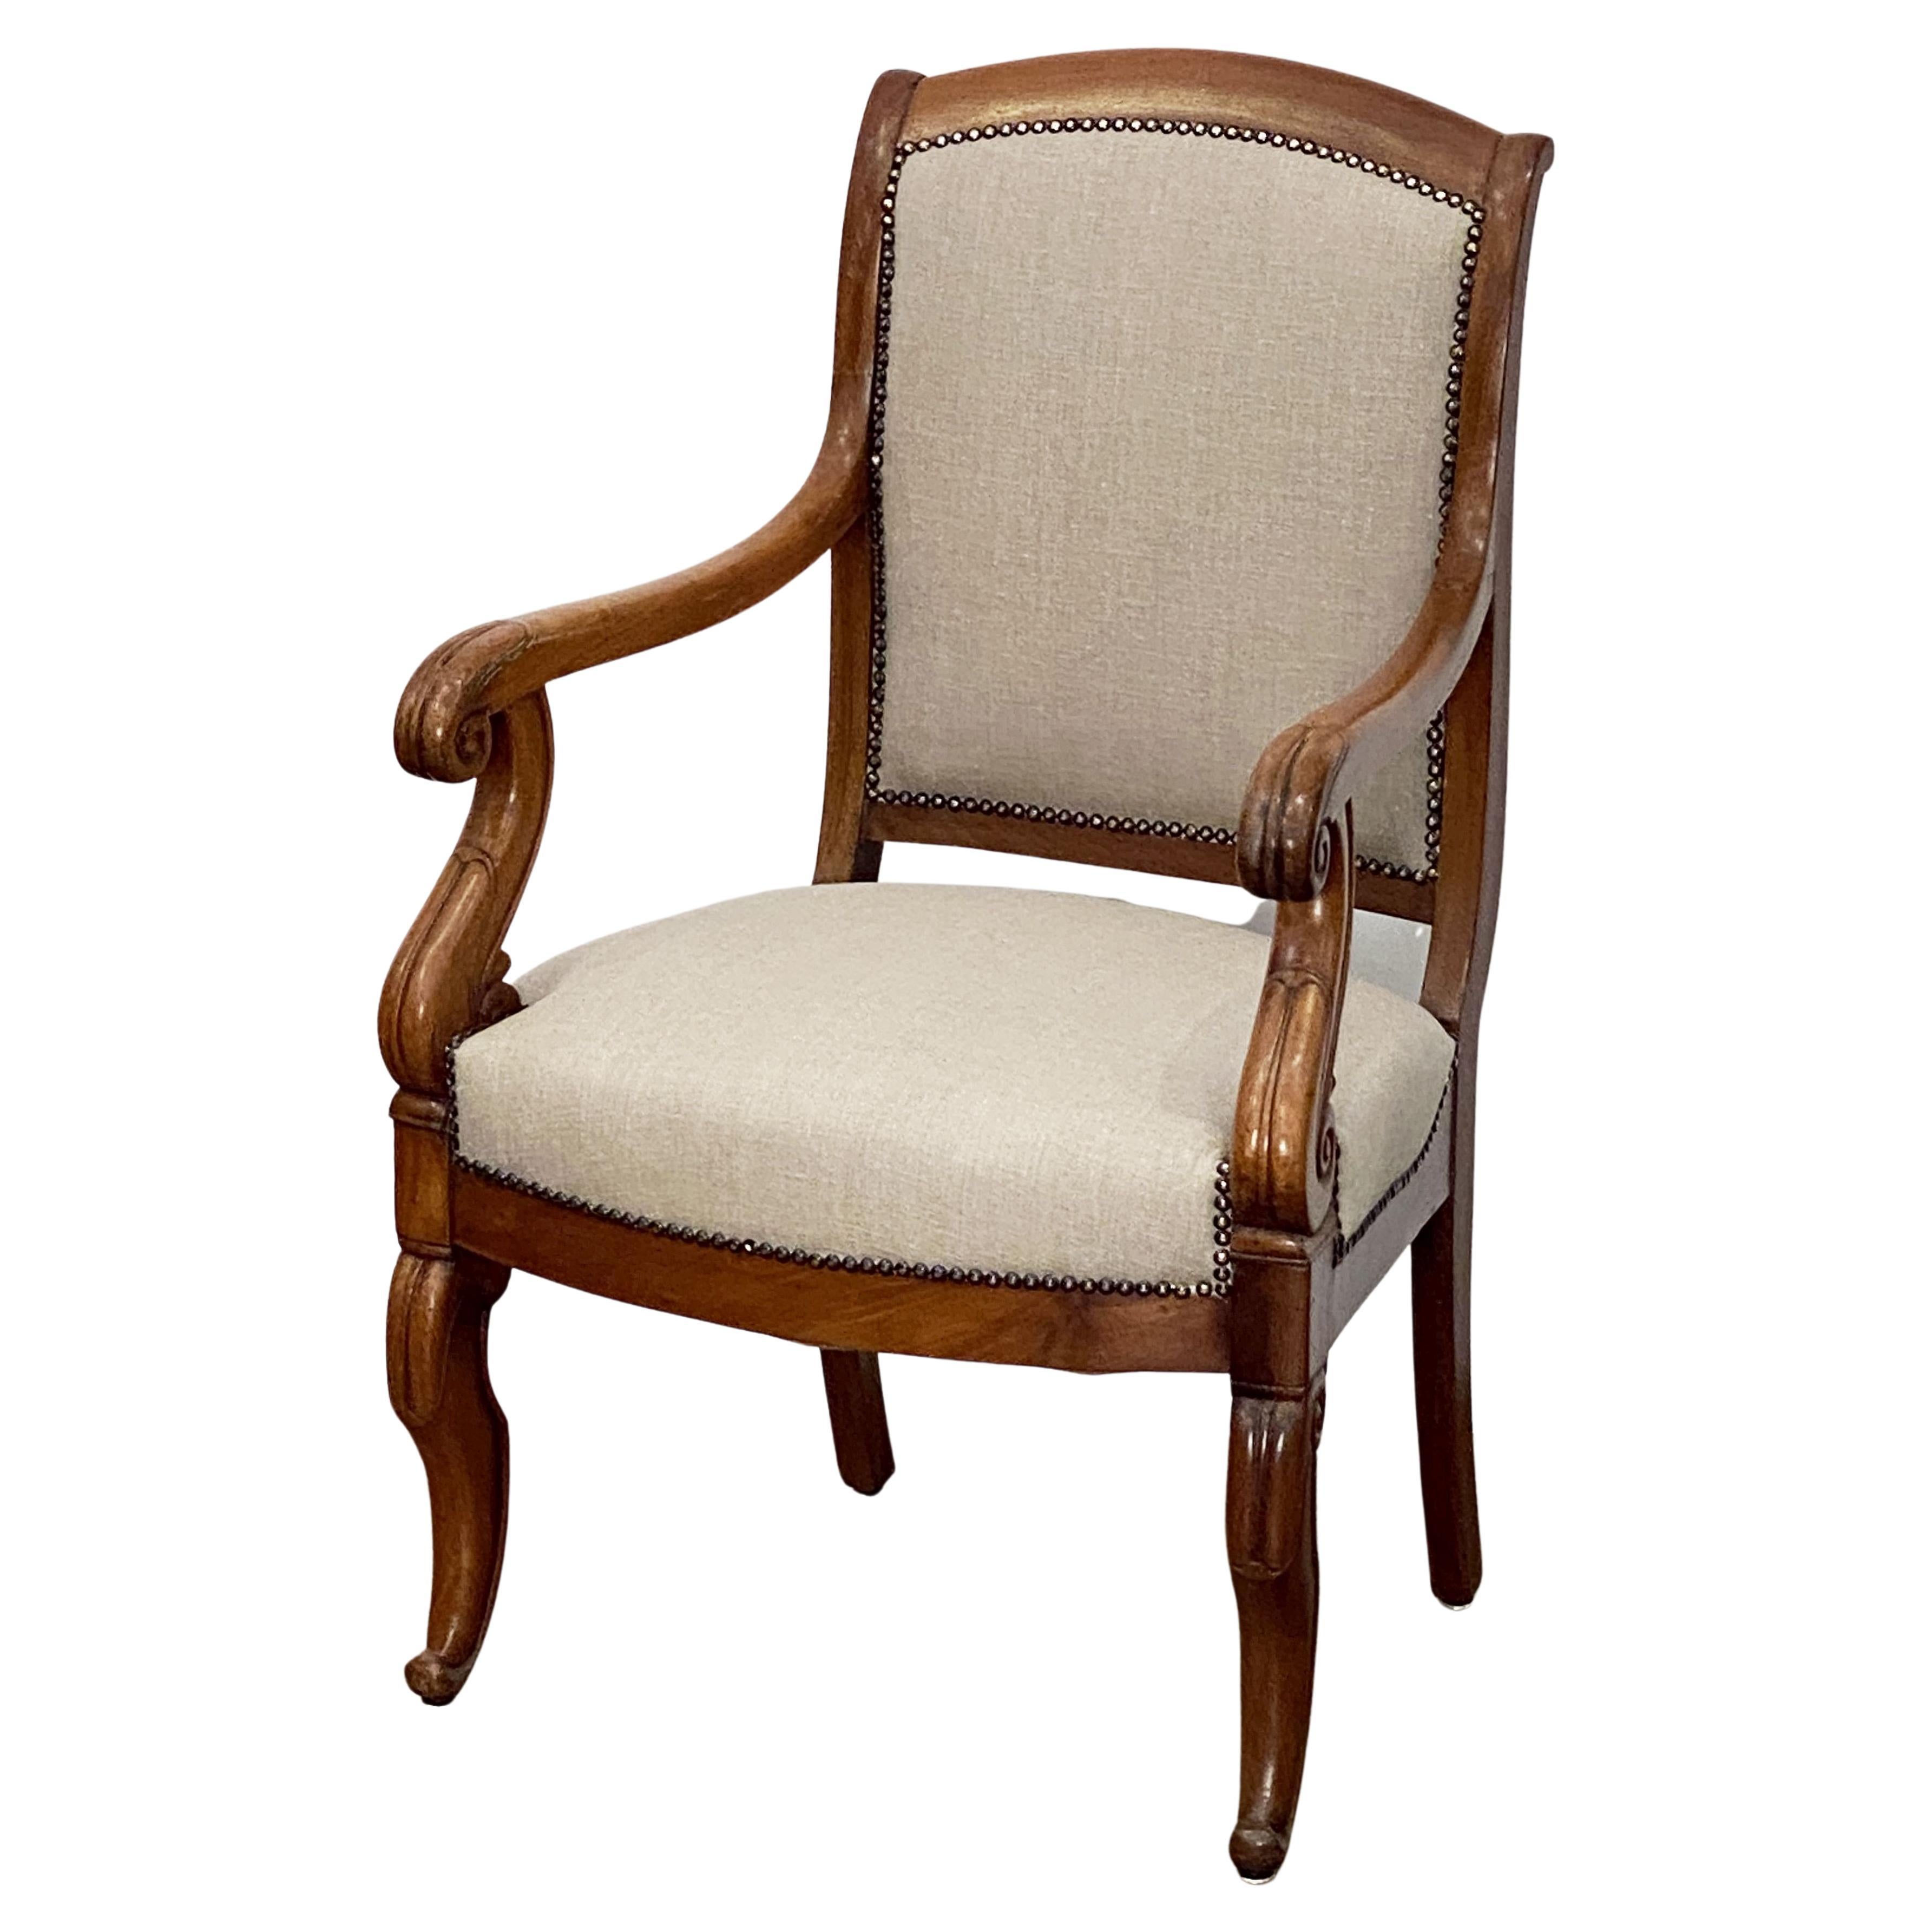 French Upholstered Fauteuil Armchair or Salon Chair of Walnut